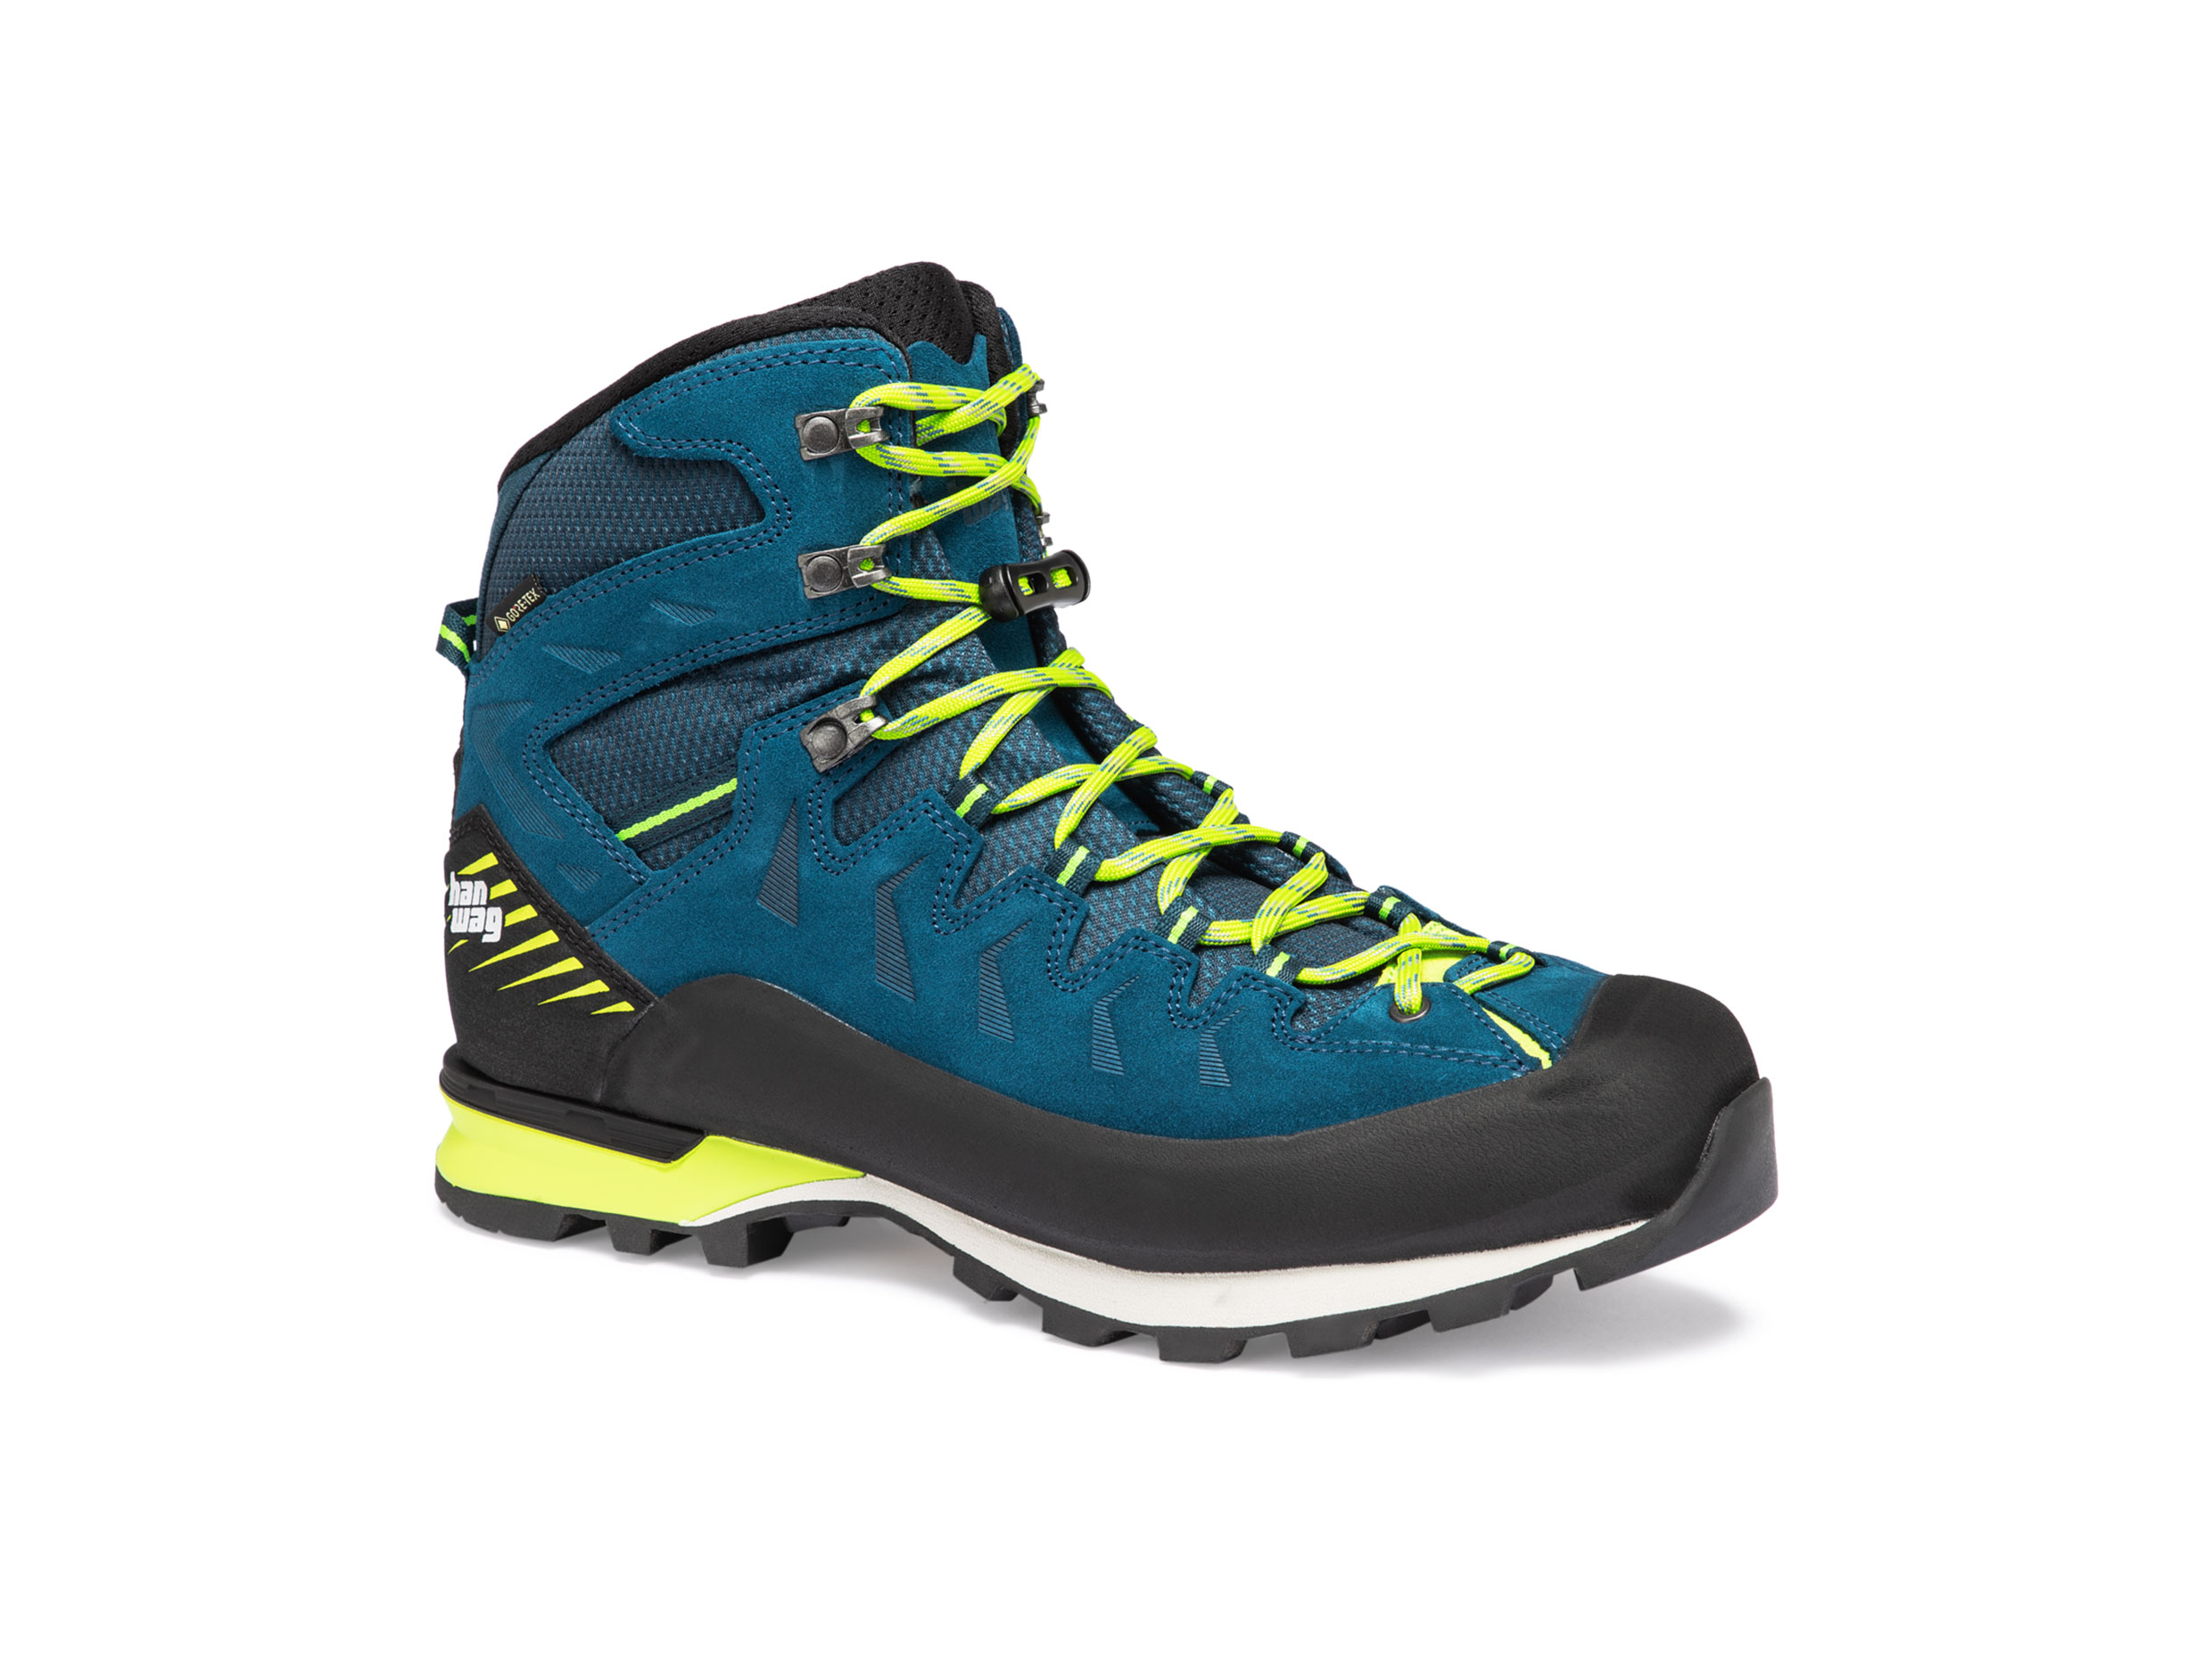 Hanwag Makra Pro GTX in different colours